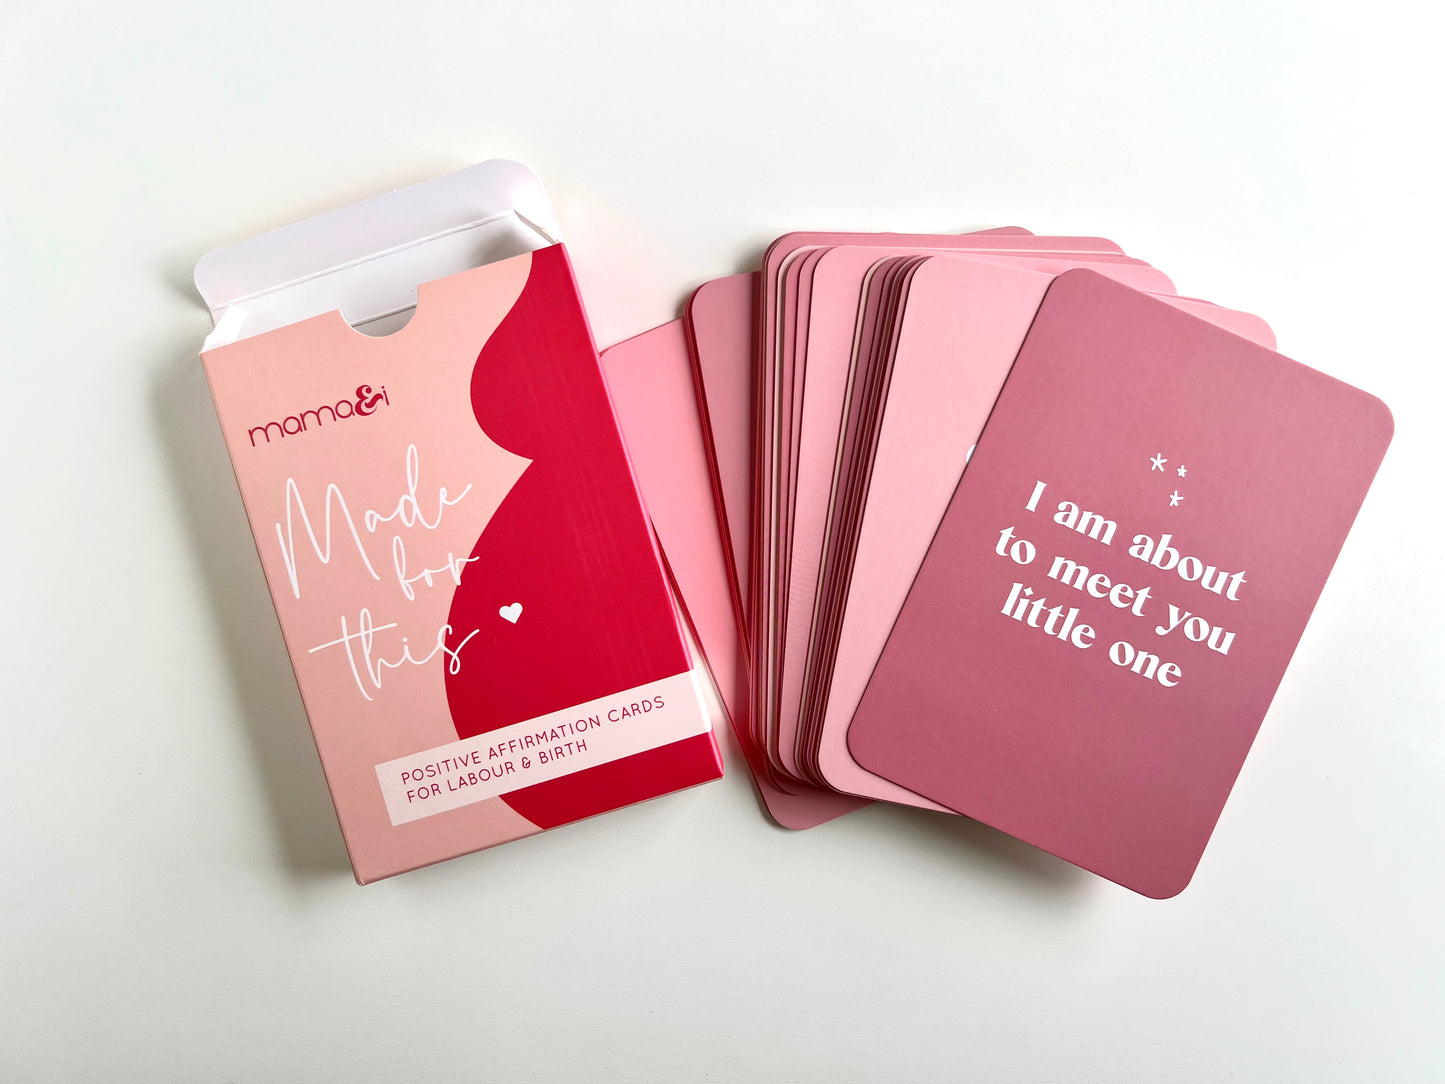 Positive Affirmation Cards for Labour & Birth